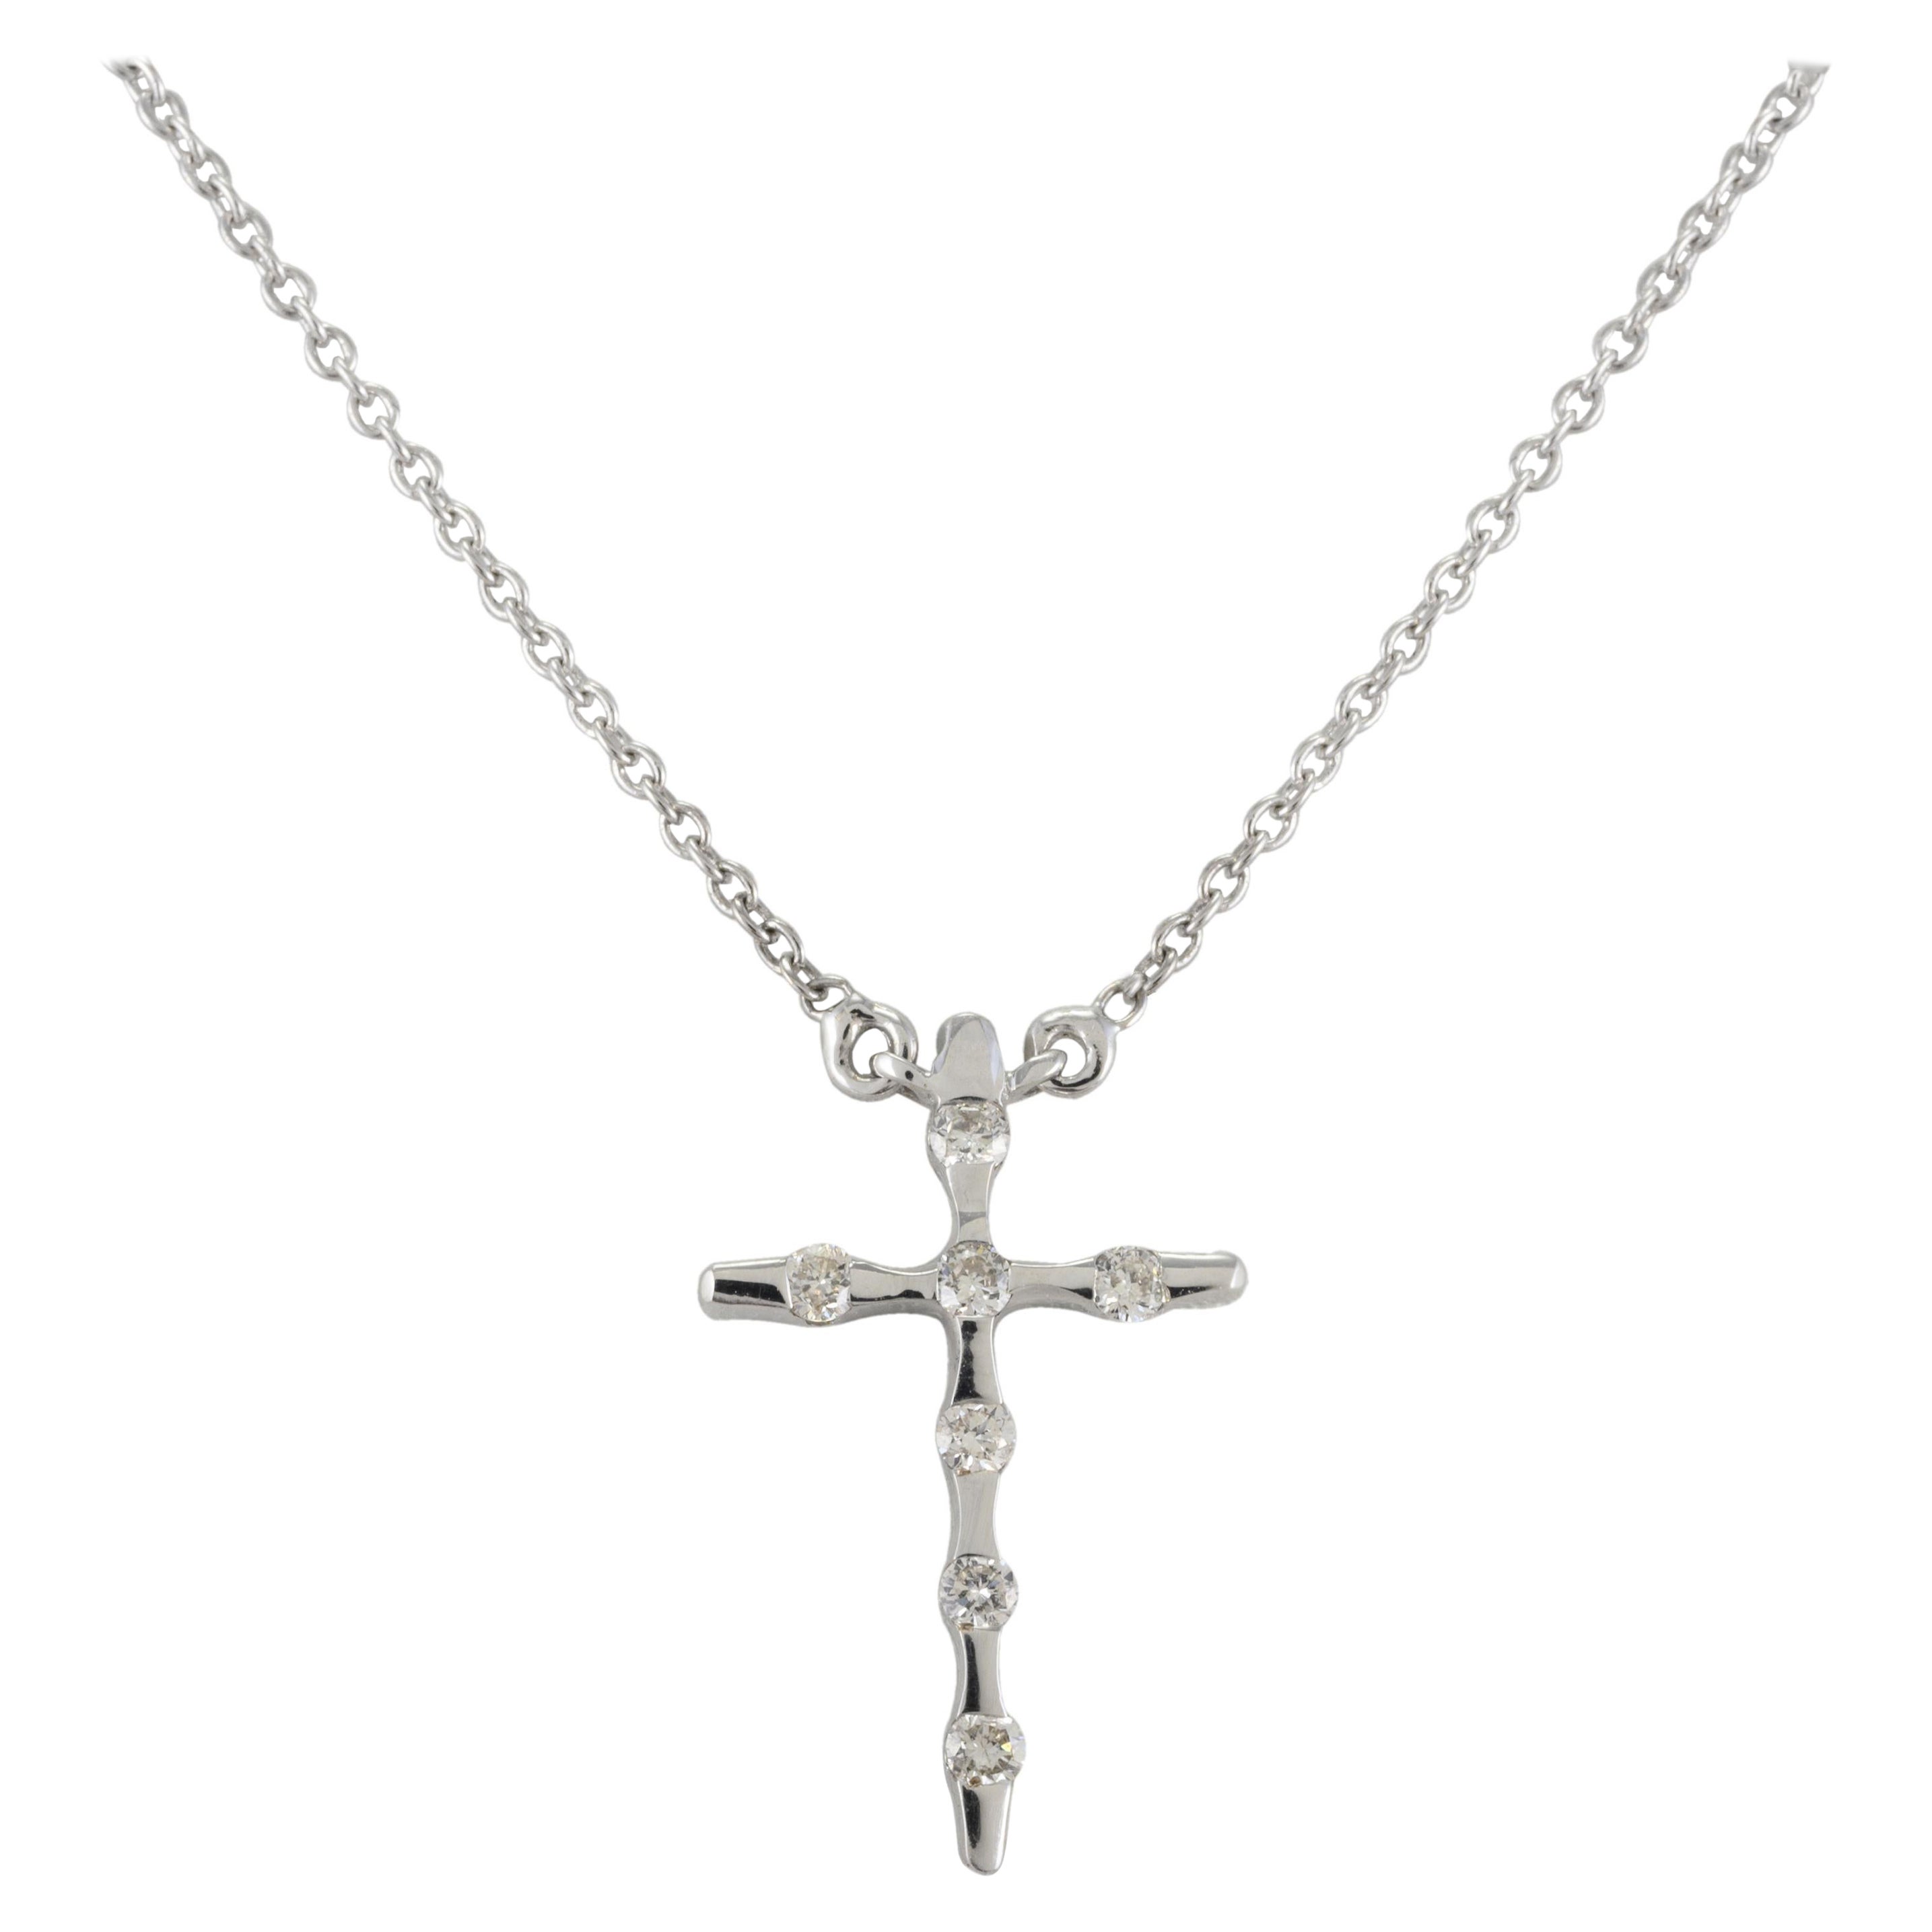 Unisex Diamond Cross Pendant Necklace in 18k Solid White Gold Christmas Gift For Sale